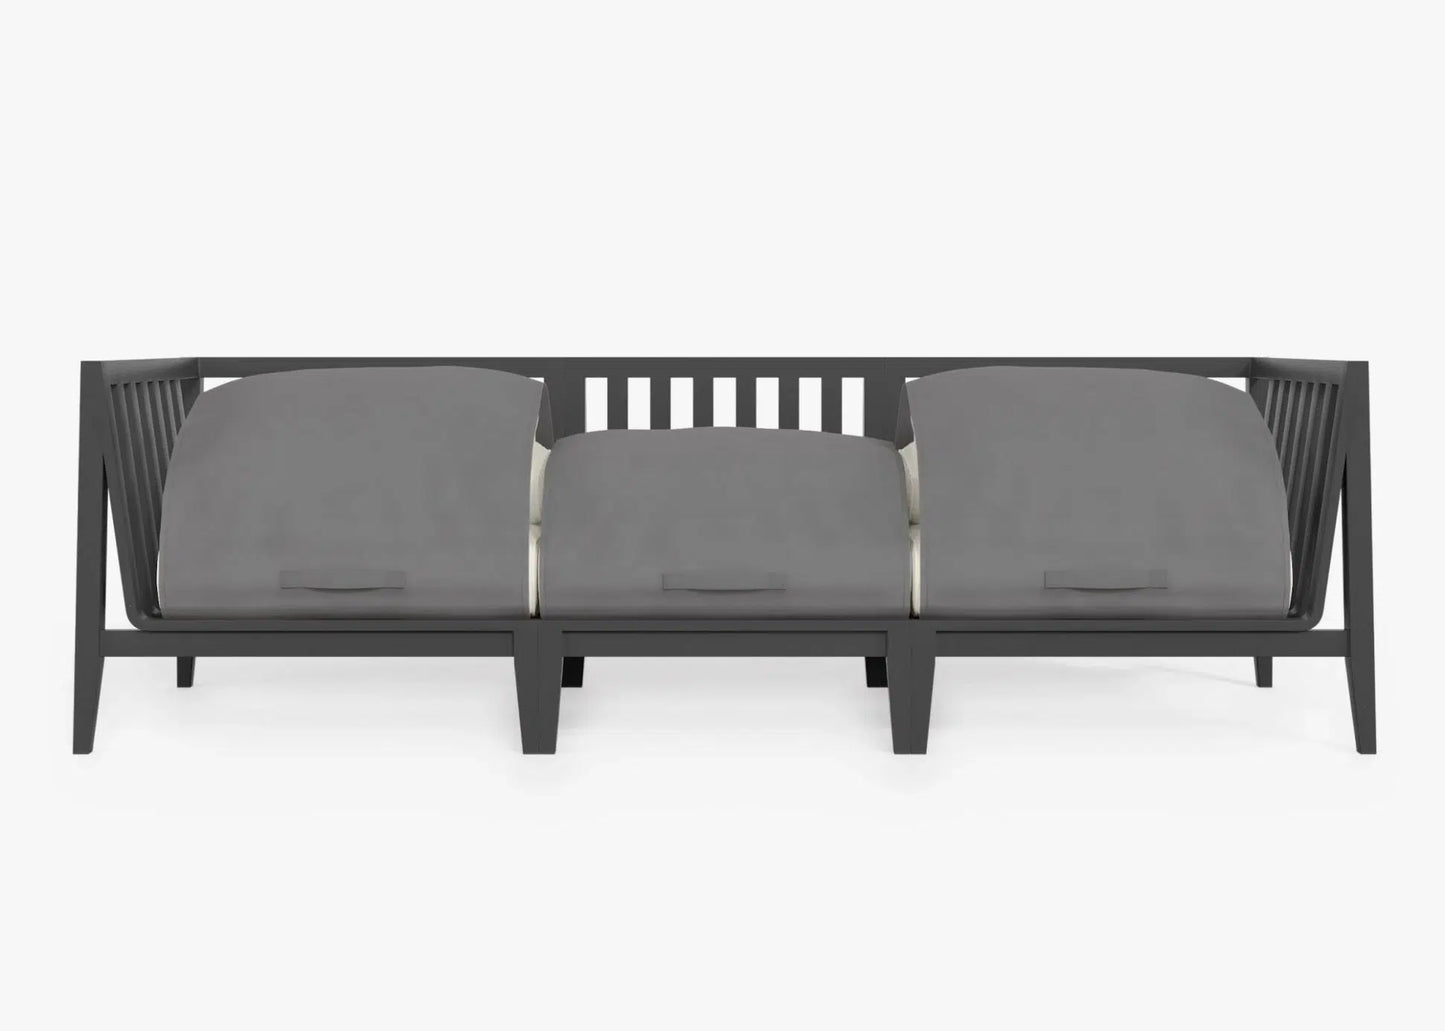 Live Outer 98" Charcoal Aluminum Outdoor 3-Seat Sofa With Palisades Cream Cushion